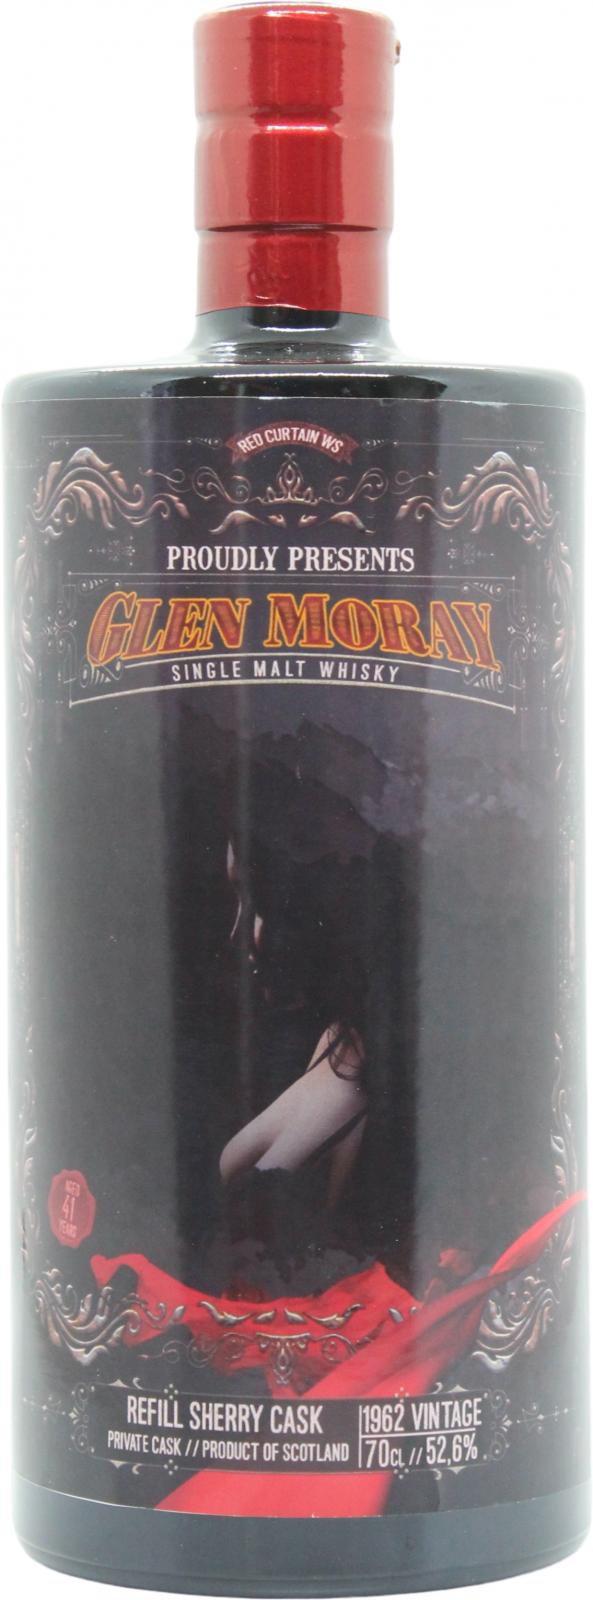 Glen Moray 1962 UD Red Curtain WS Refill Sherry Cask Private Bottling 52.6% 700ml